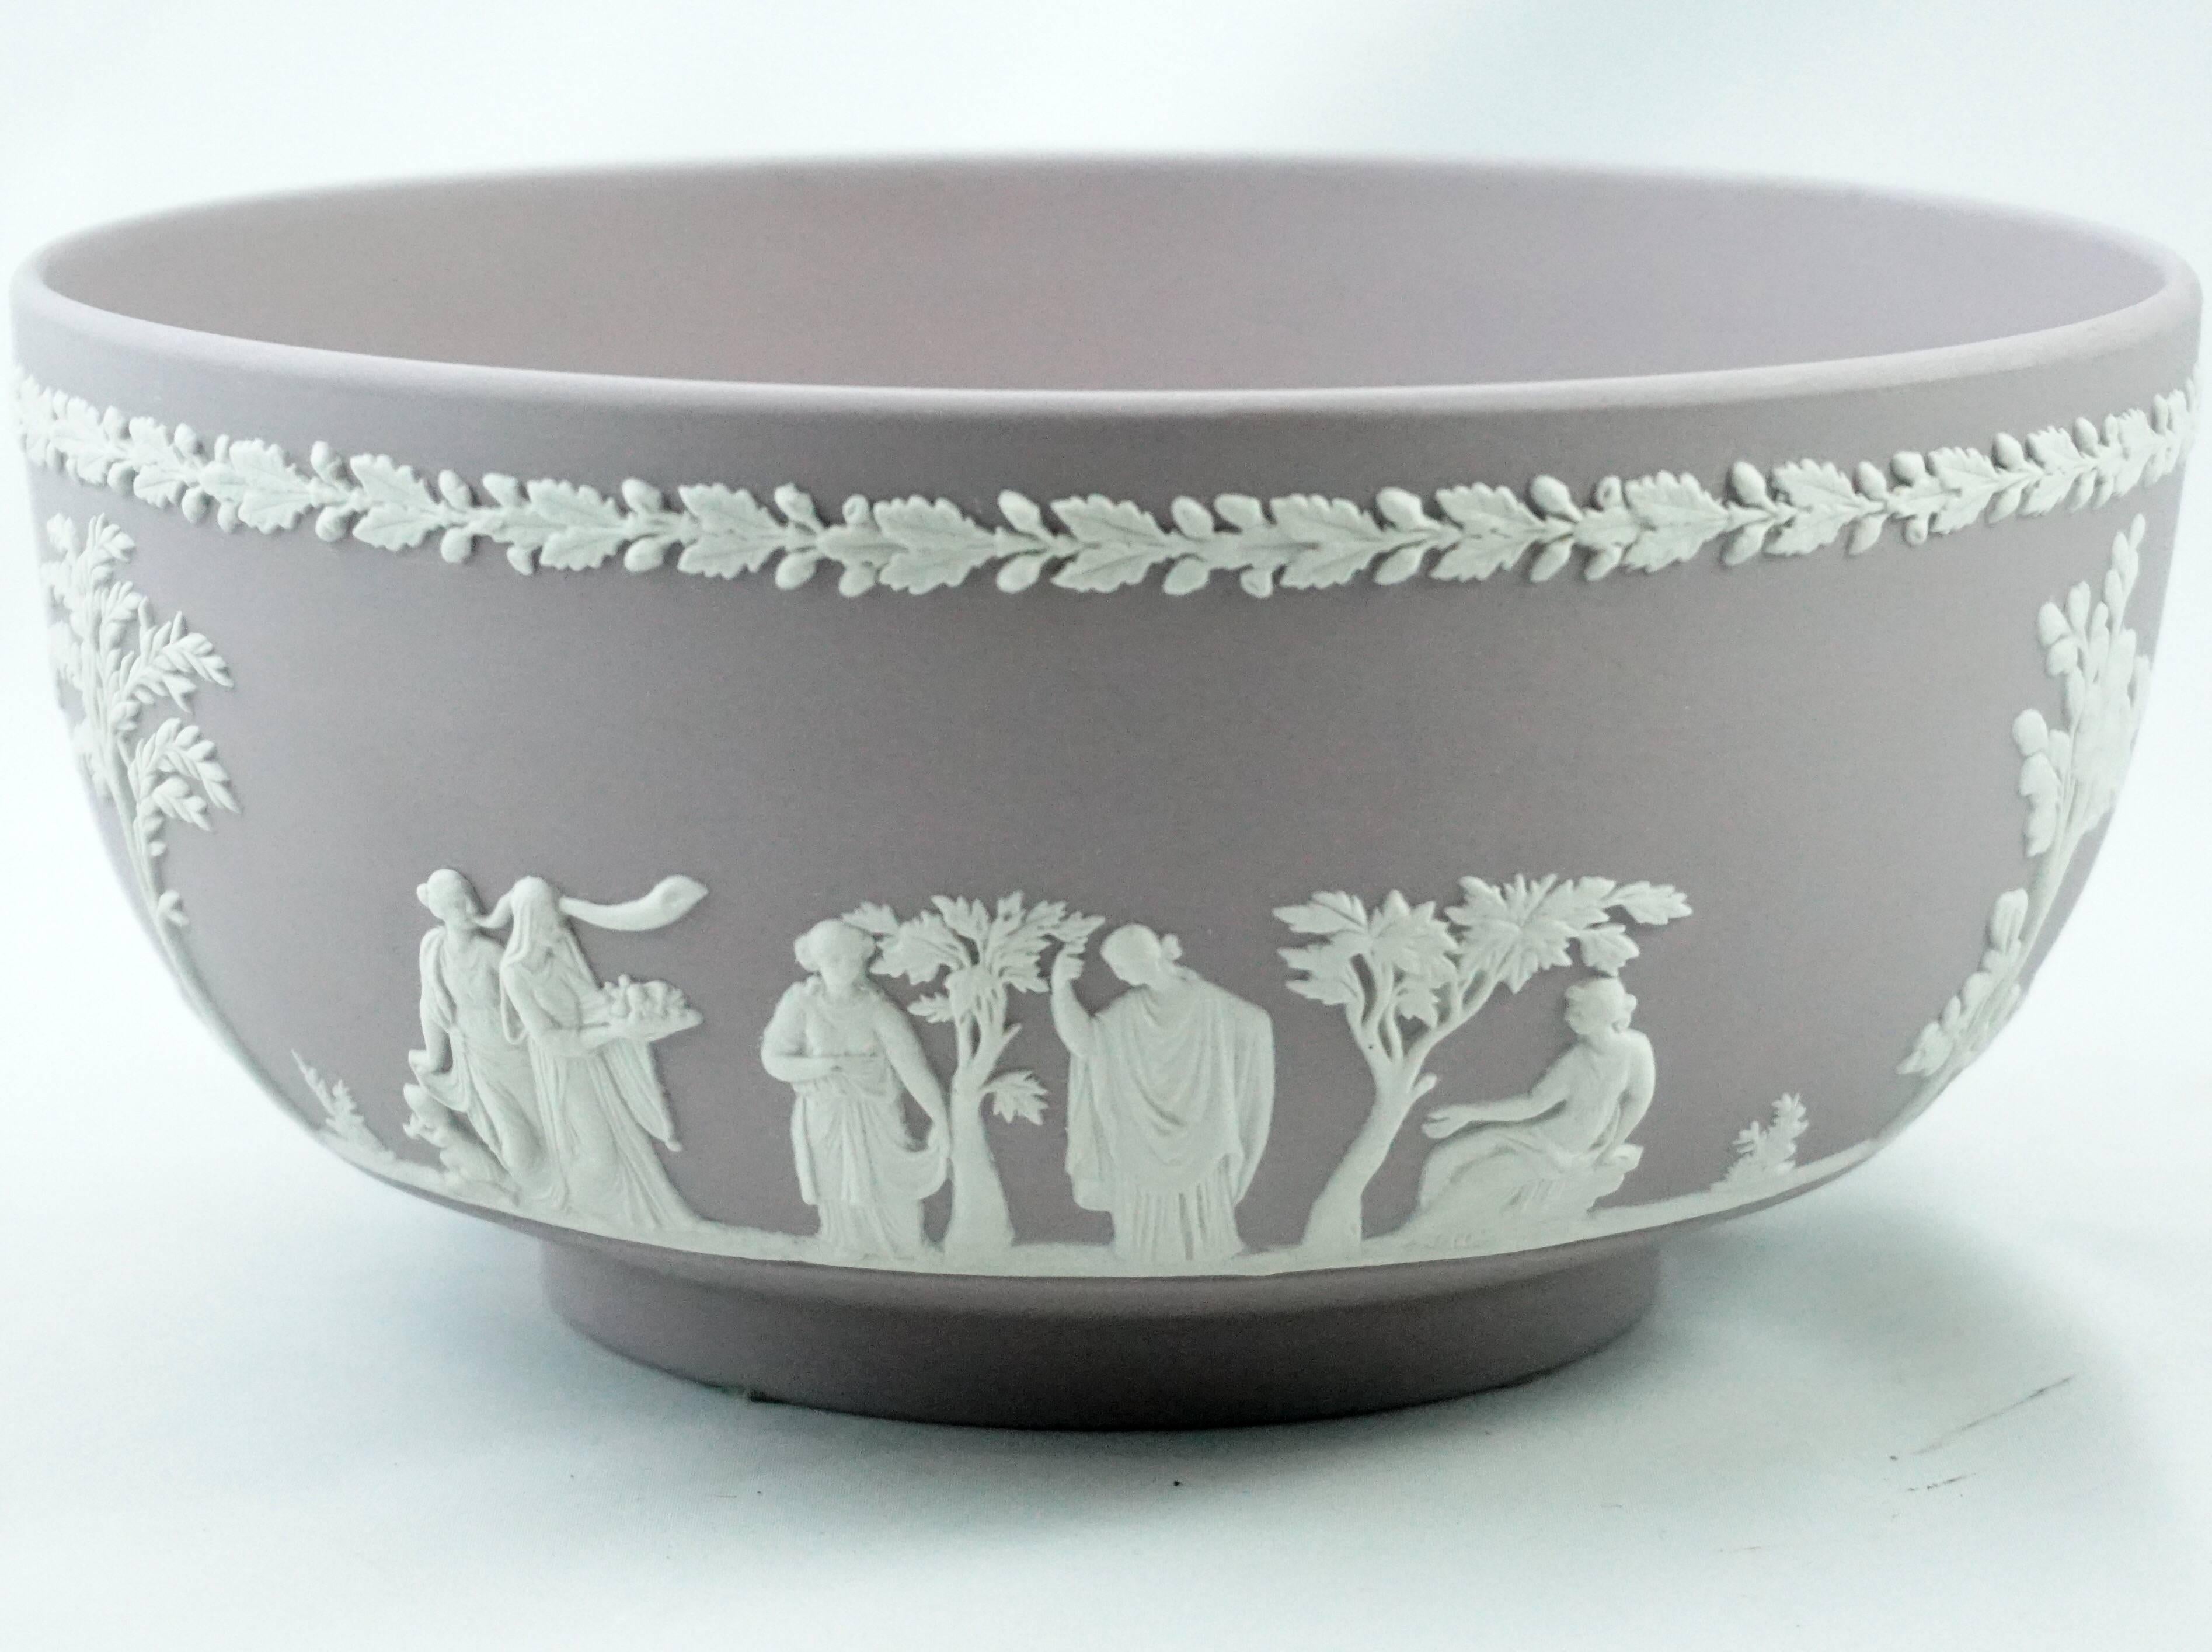 Wedgwood lilac solid jasper ware sacrifice bowl featuring the bas-relief of sacrifice figures. Perfect size bowl.

This bowl measures 7 7/8 diameter x 3 5/8 tall 

Marked ‘Wedgwood made in England’ with the registered English trademark symbol